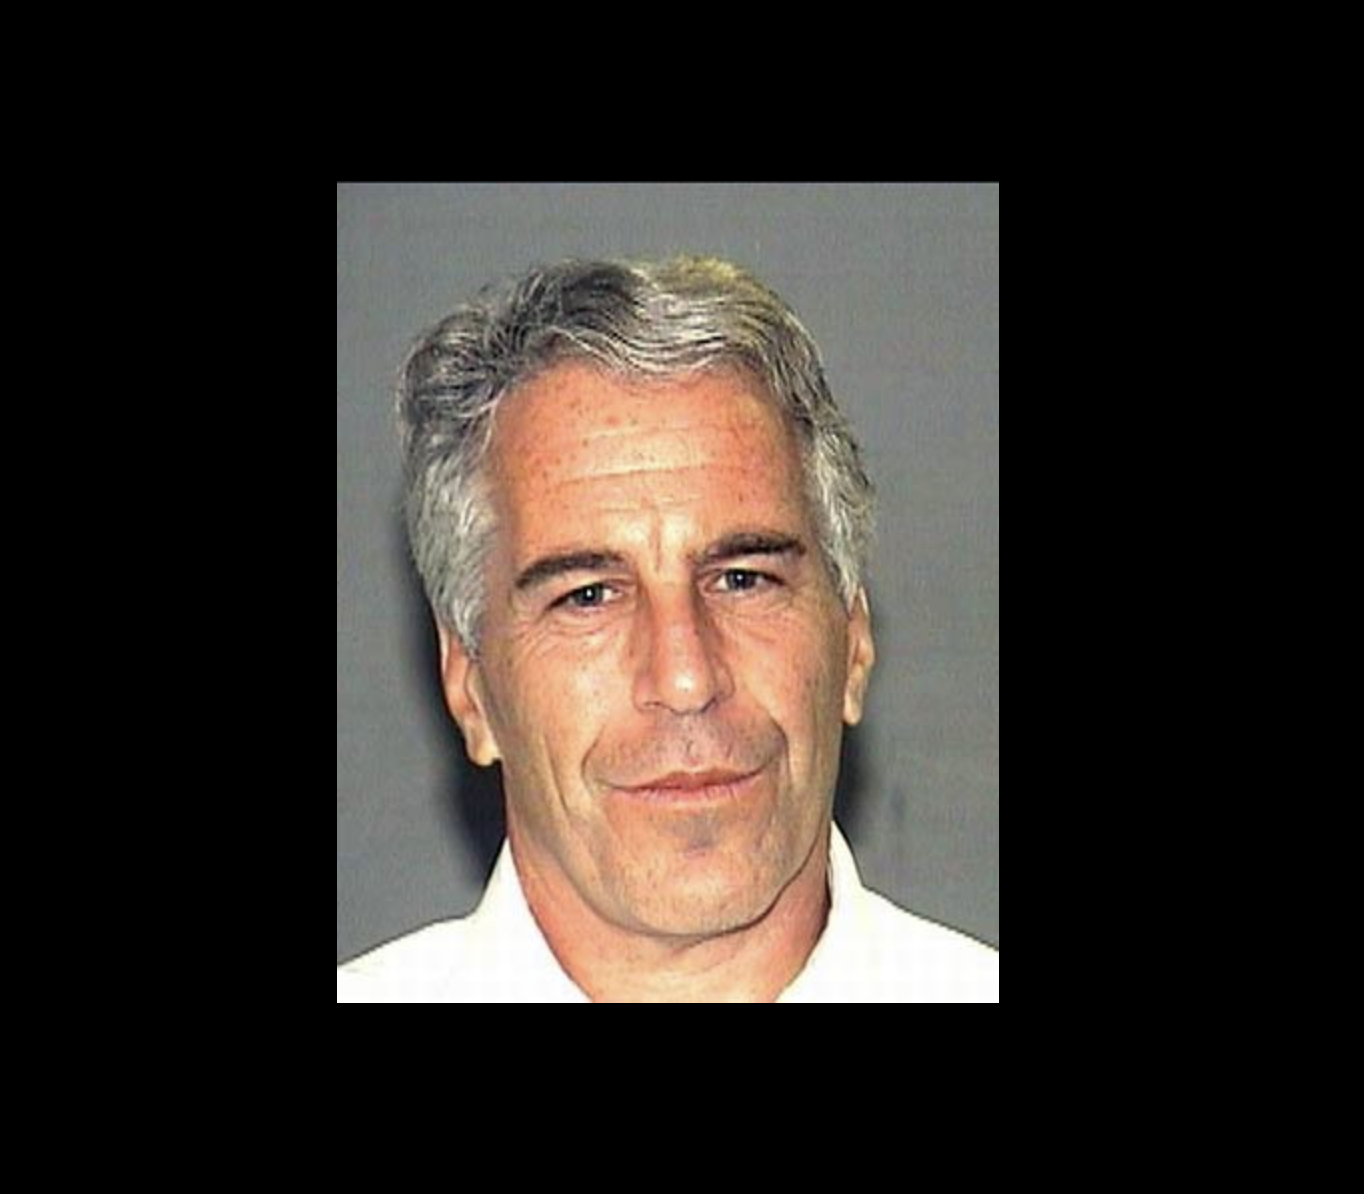 epstein-papers-reveal-bill-clinton’s-interest-in-young-girls